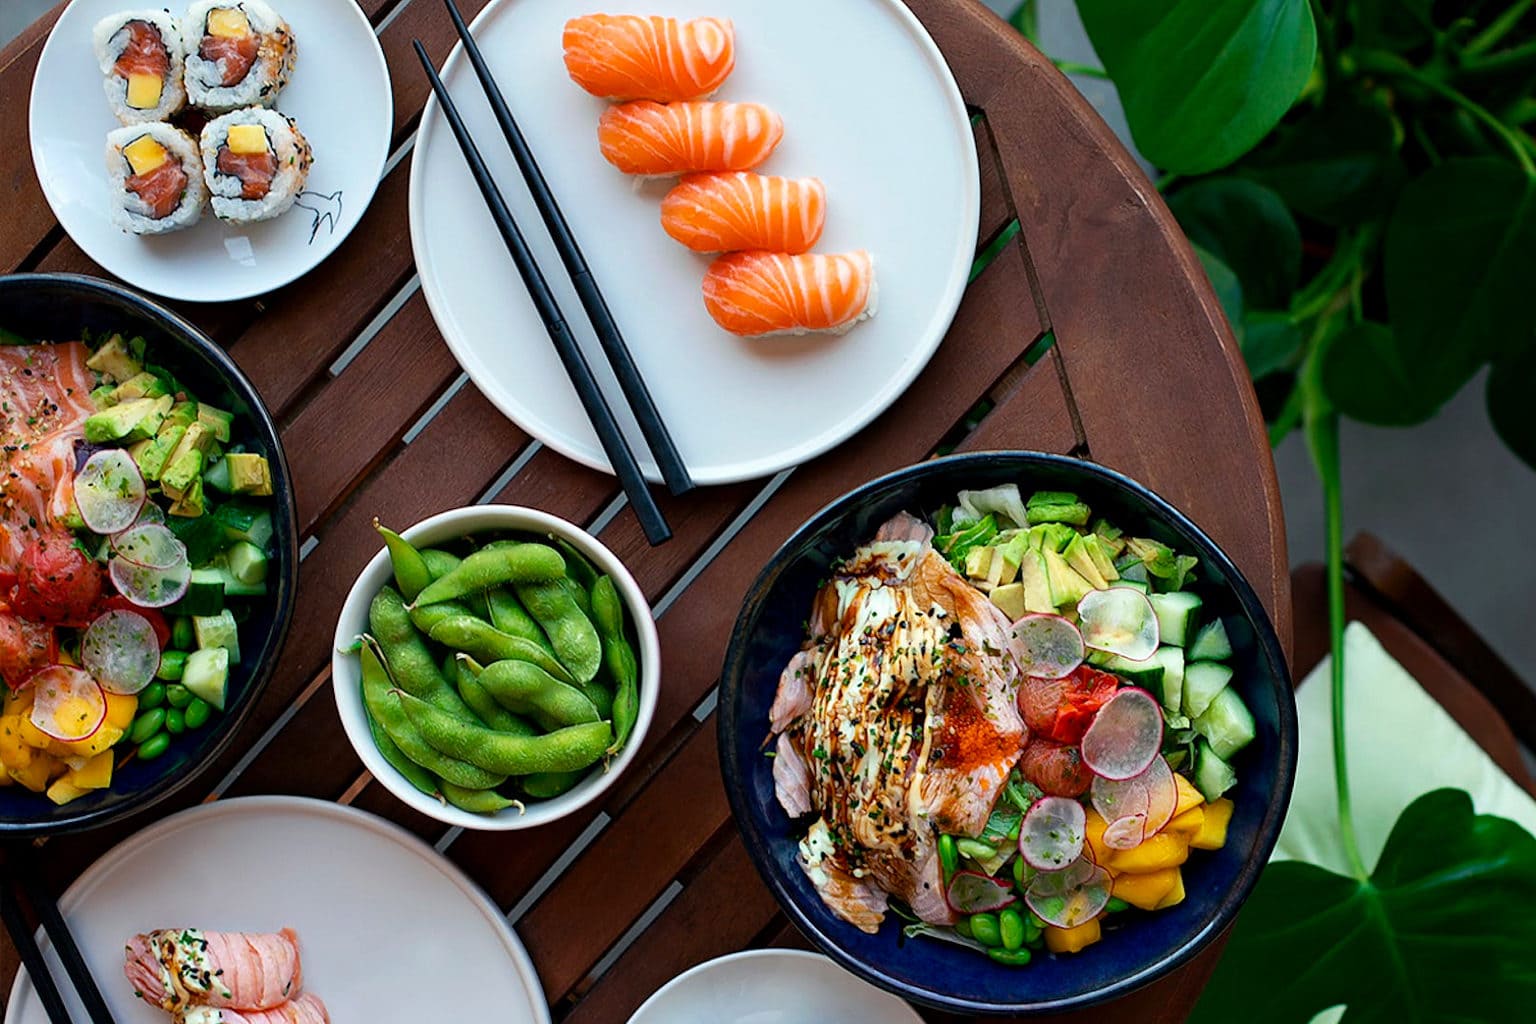 Save big on meals via dine-in, takeout or delivery with this deal.